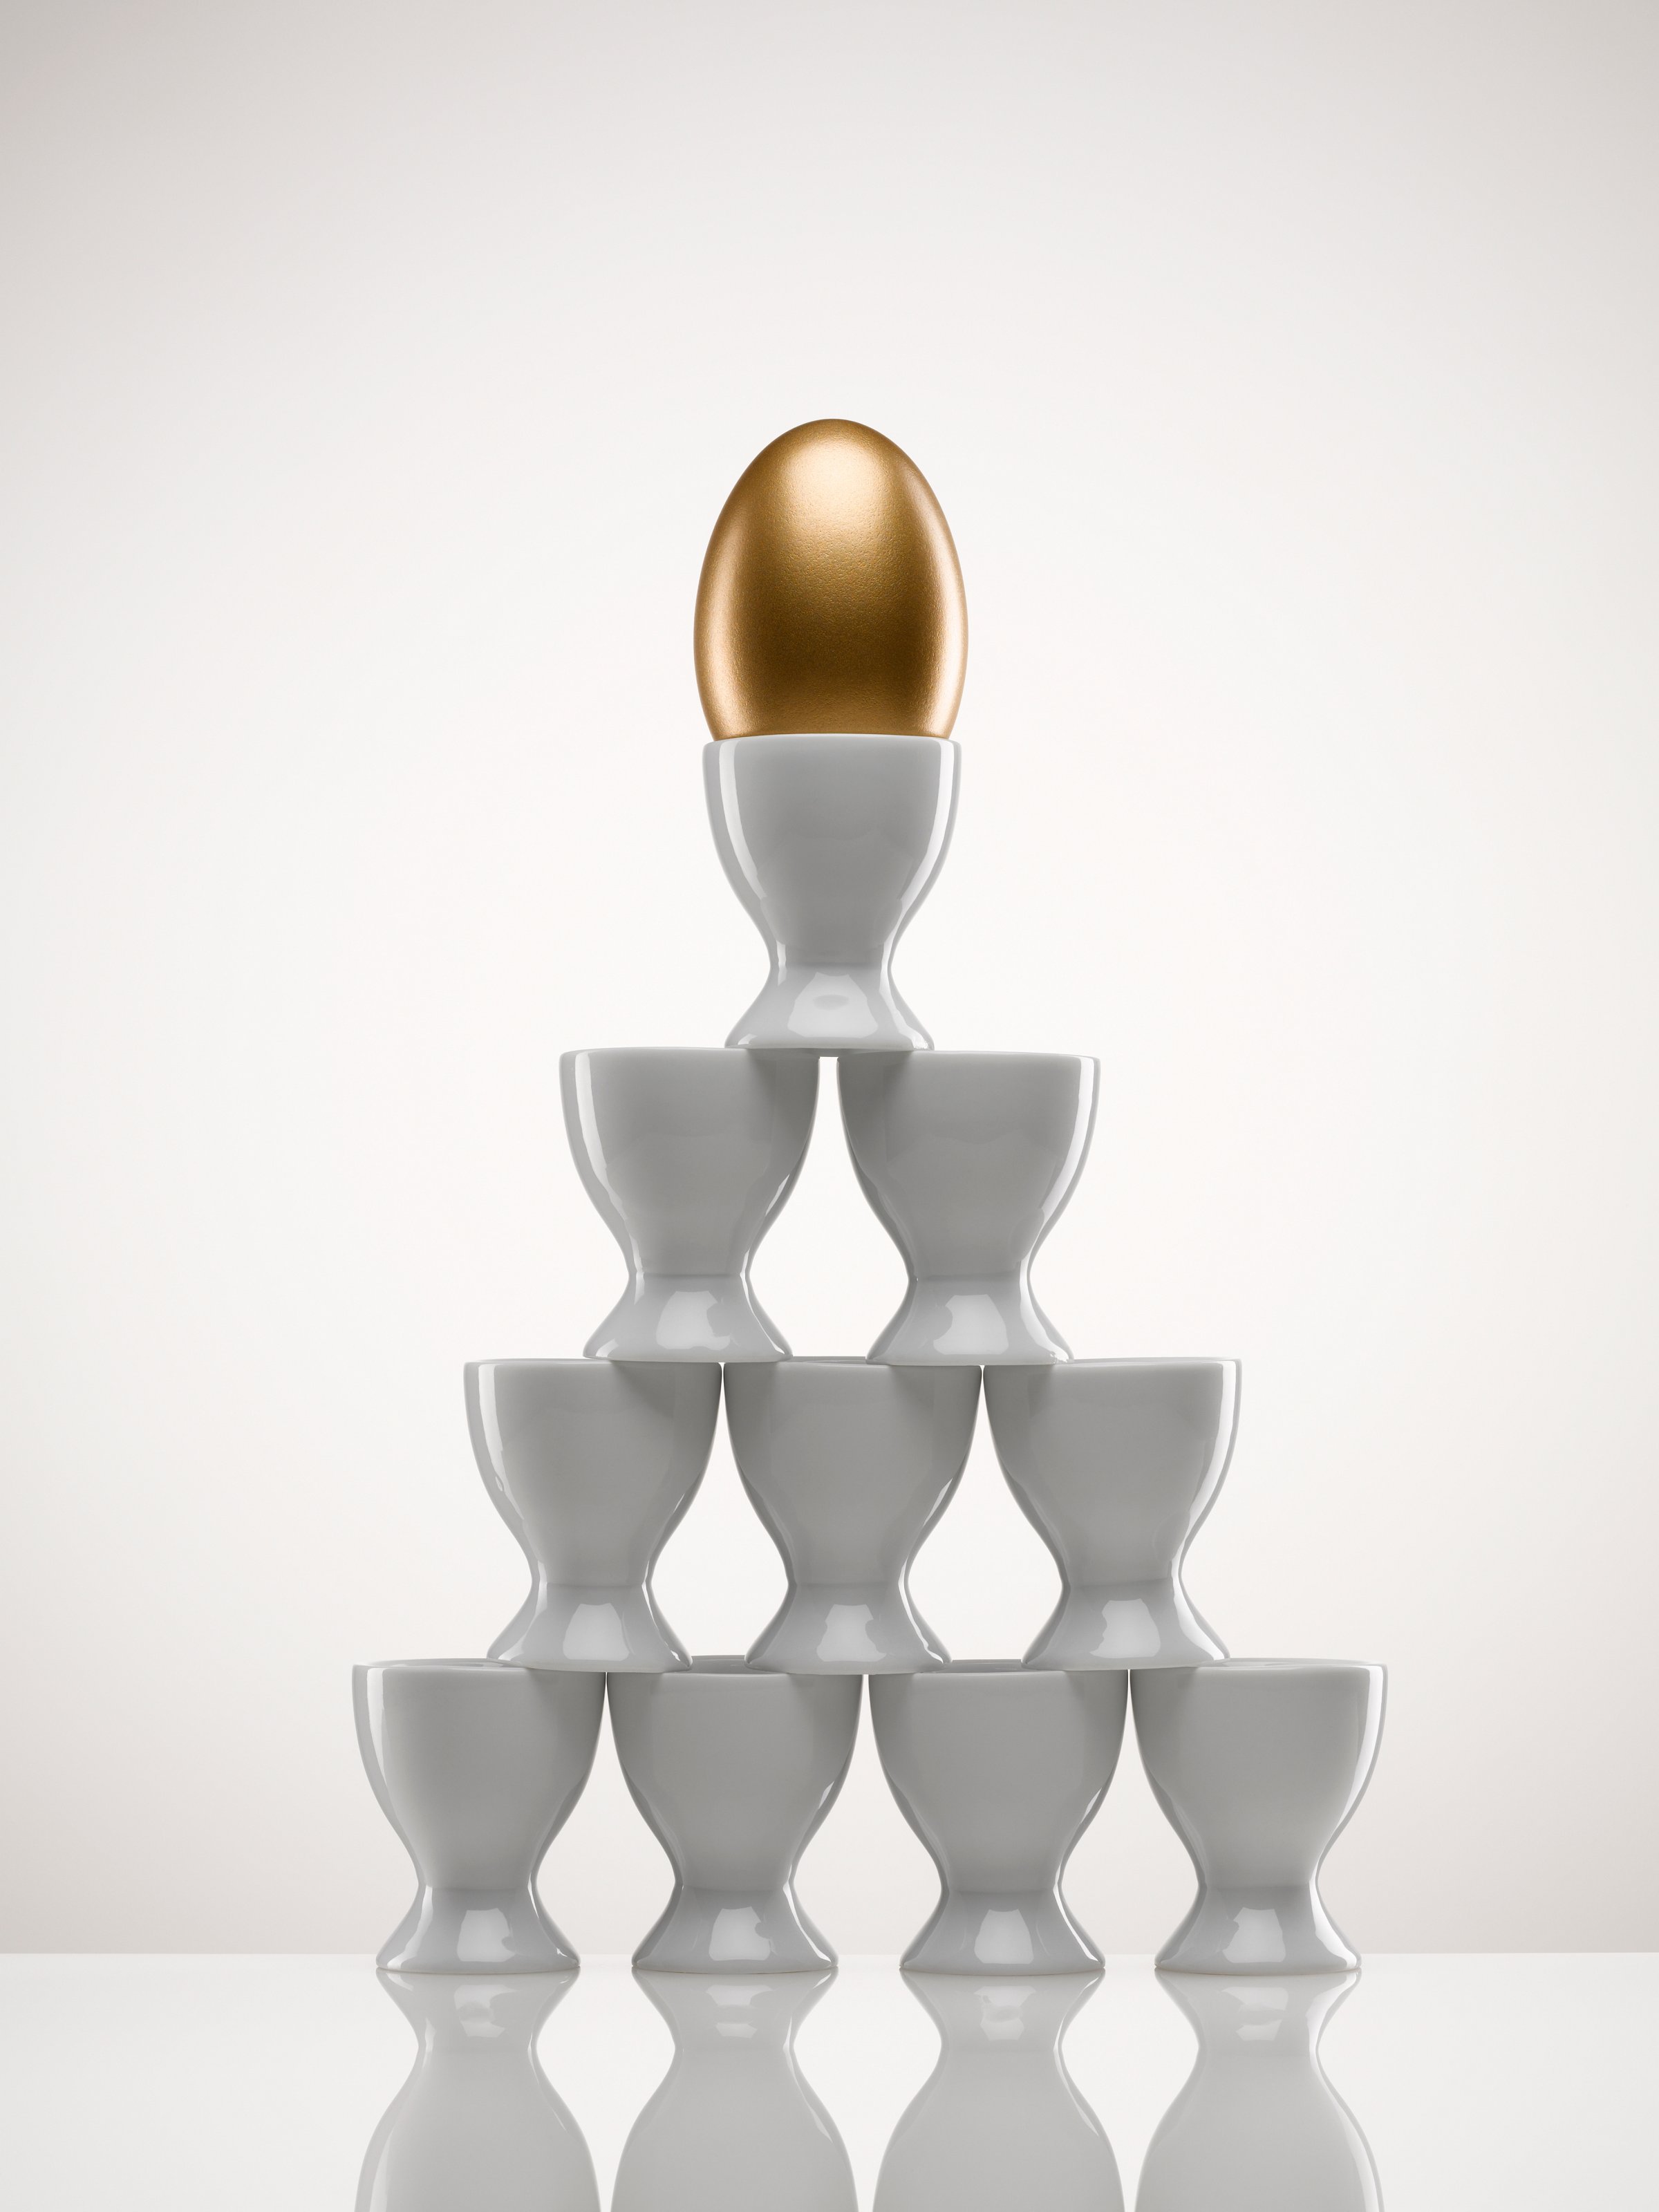 Stacked egg cups with golden egg